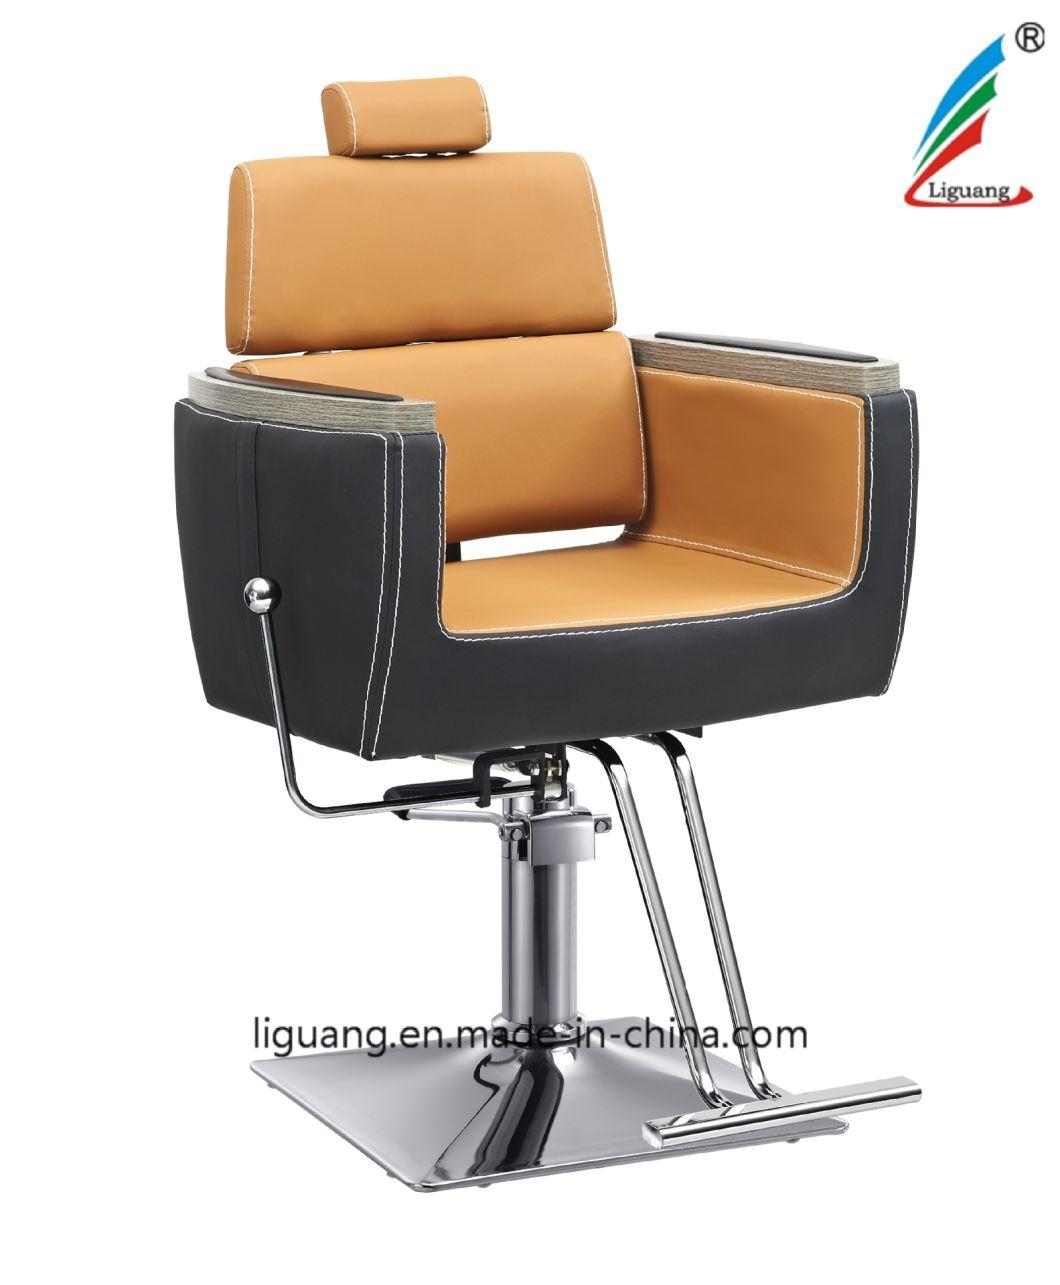 2018 Onsalenow Salon Furniture, Styling Chair, Make up Chair, Barber Chair